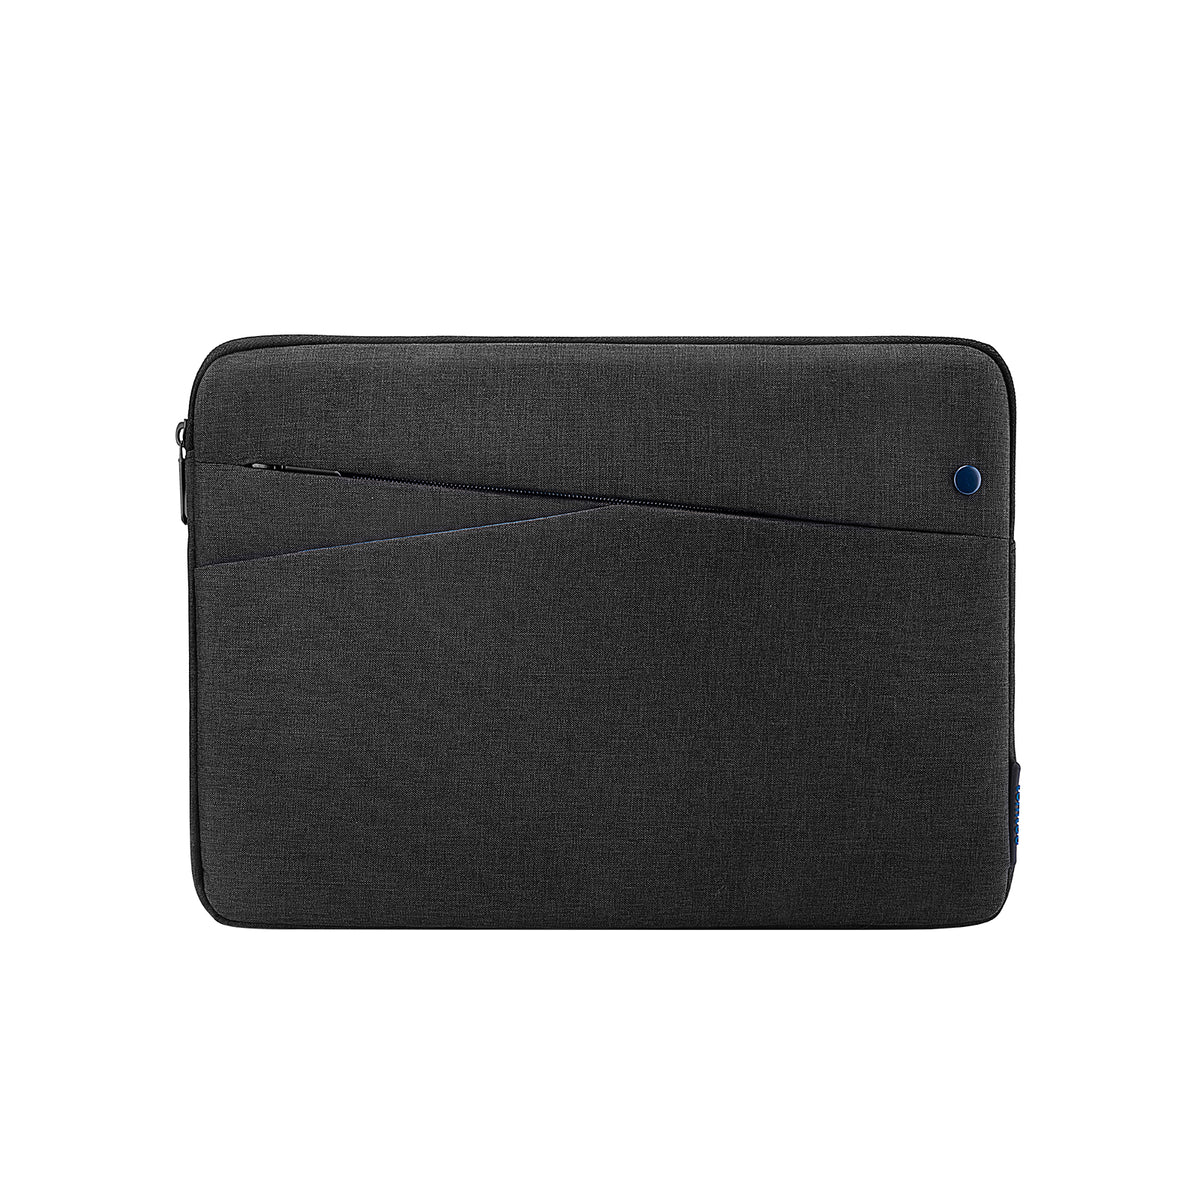 primary_Basic-A18 Tablet Sleeve for 12.9